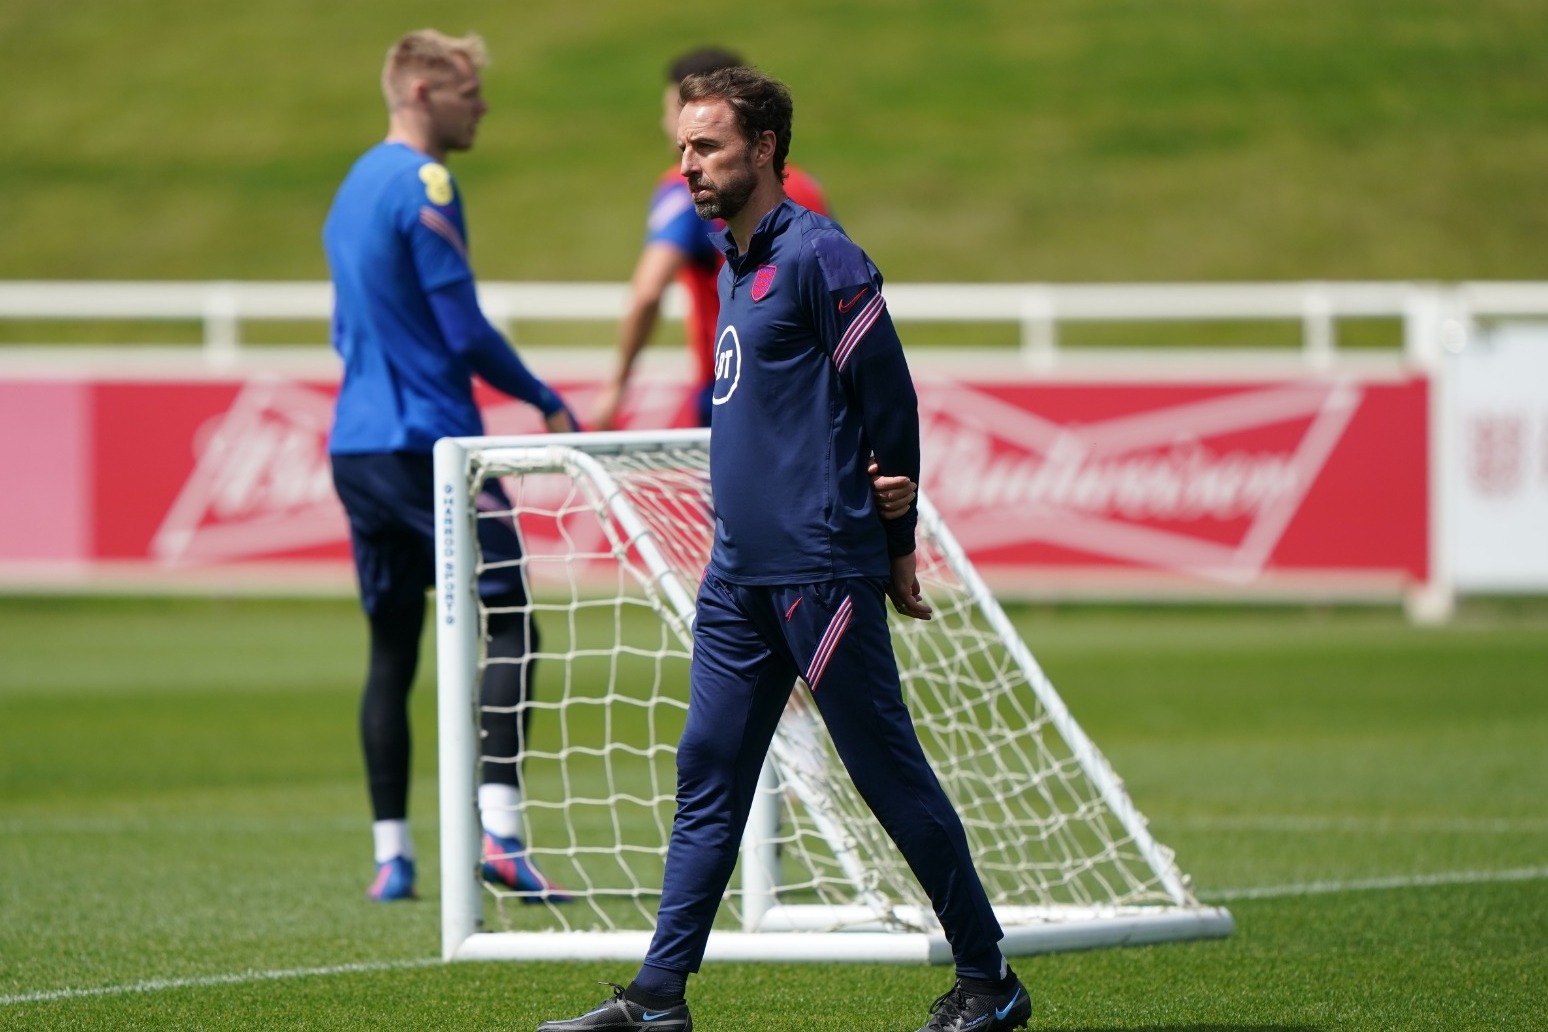 Gareth Southgate: Embarrassment to country that Italy game behind closed doors 